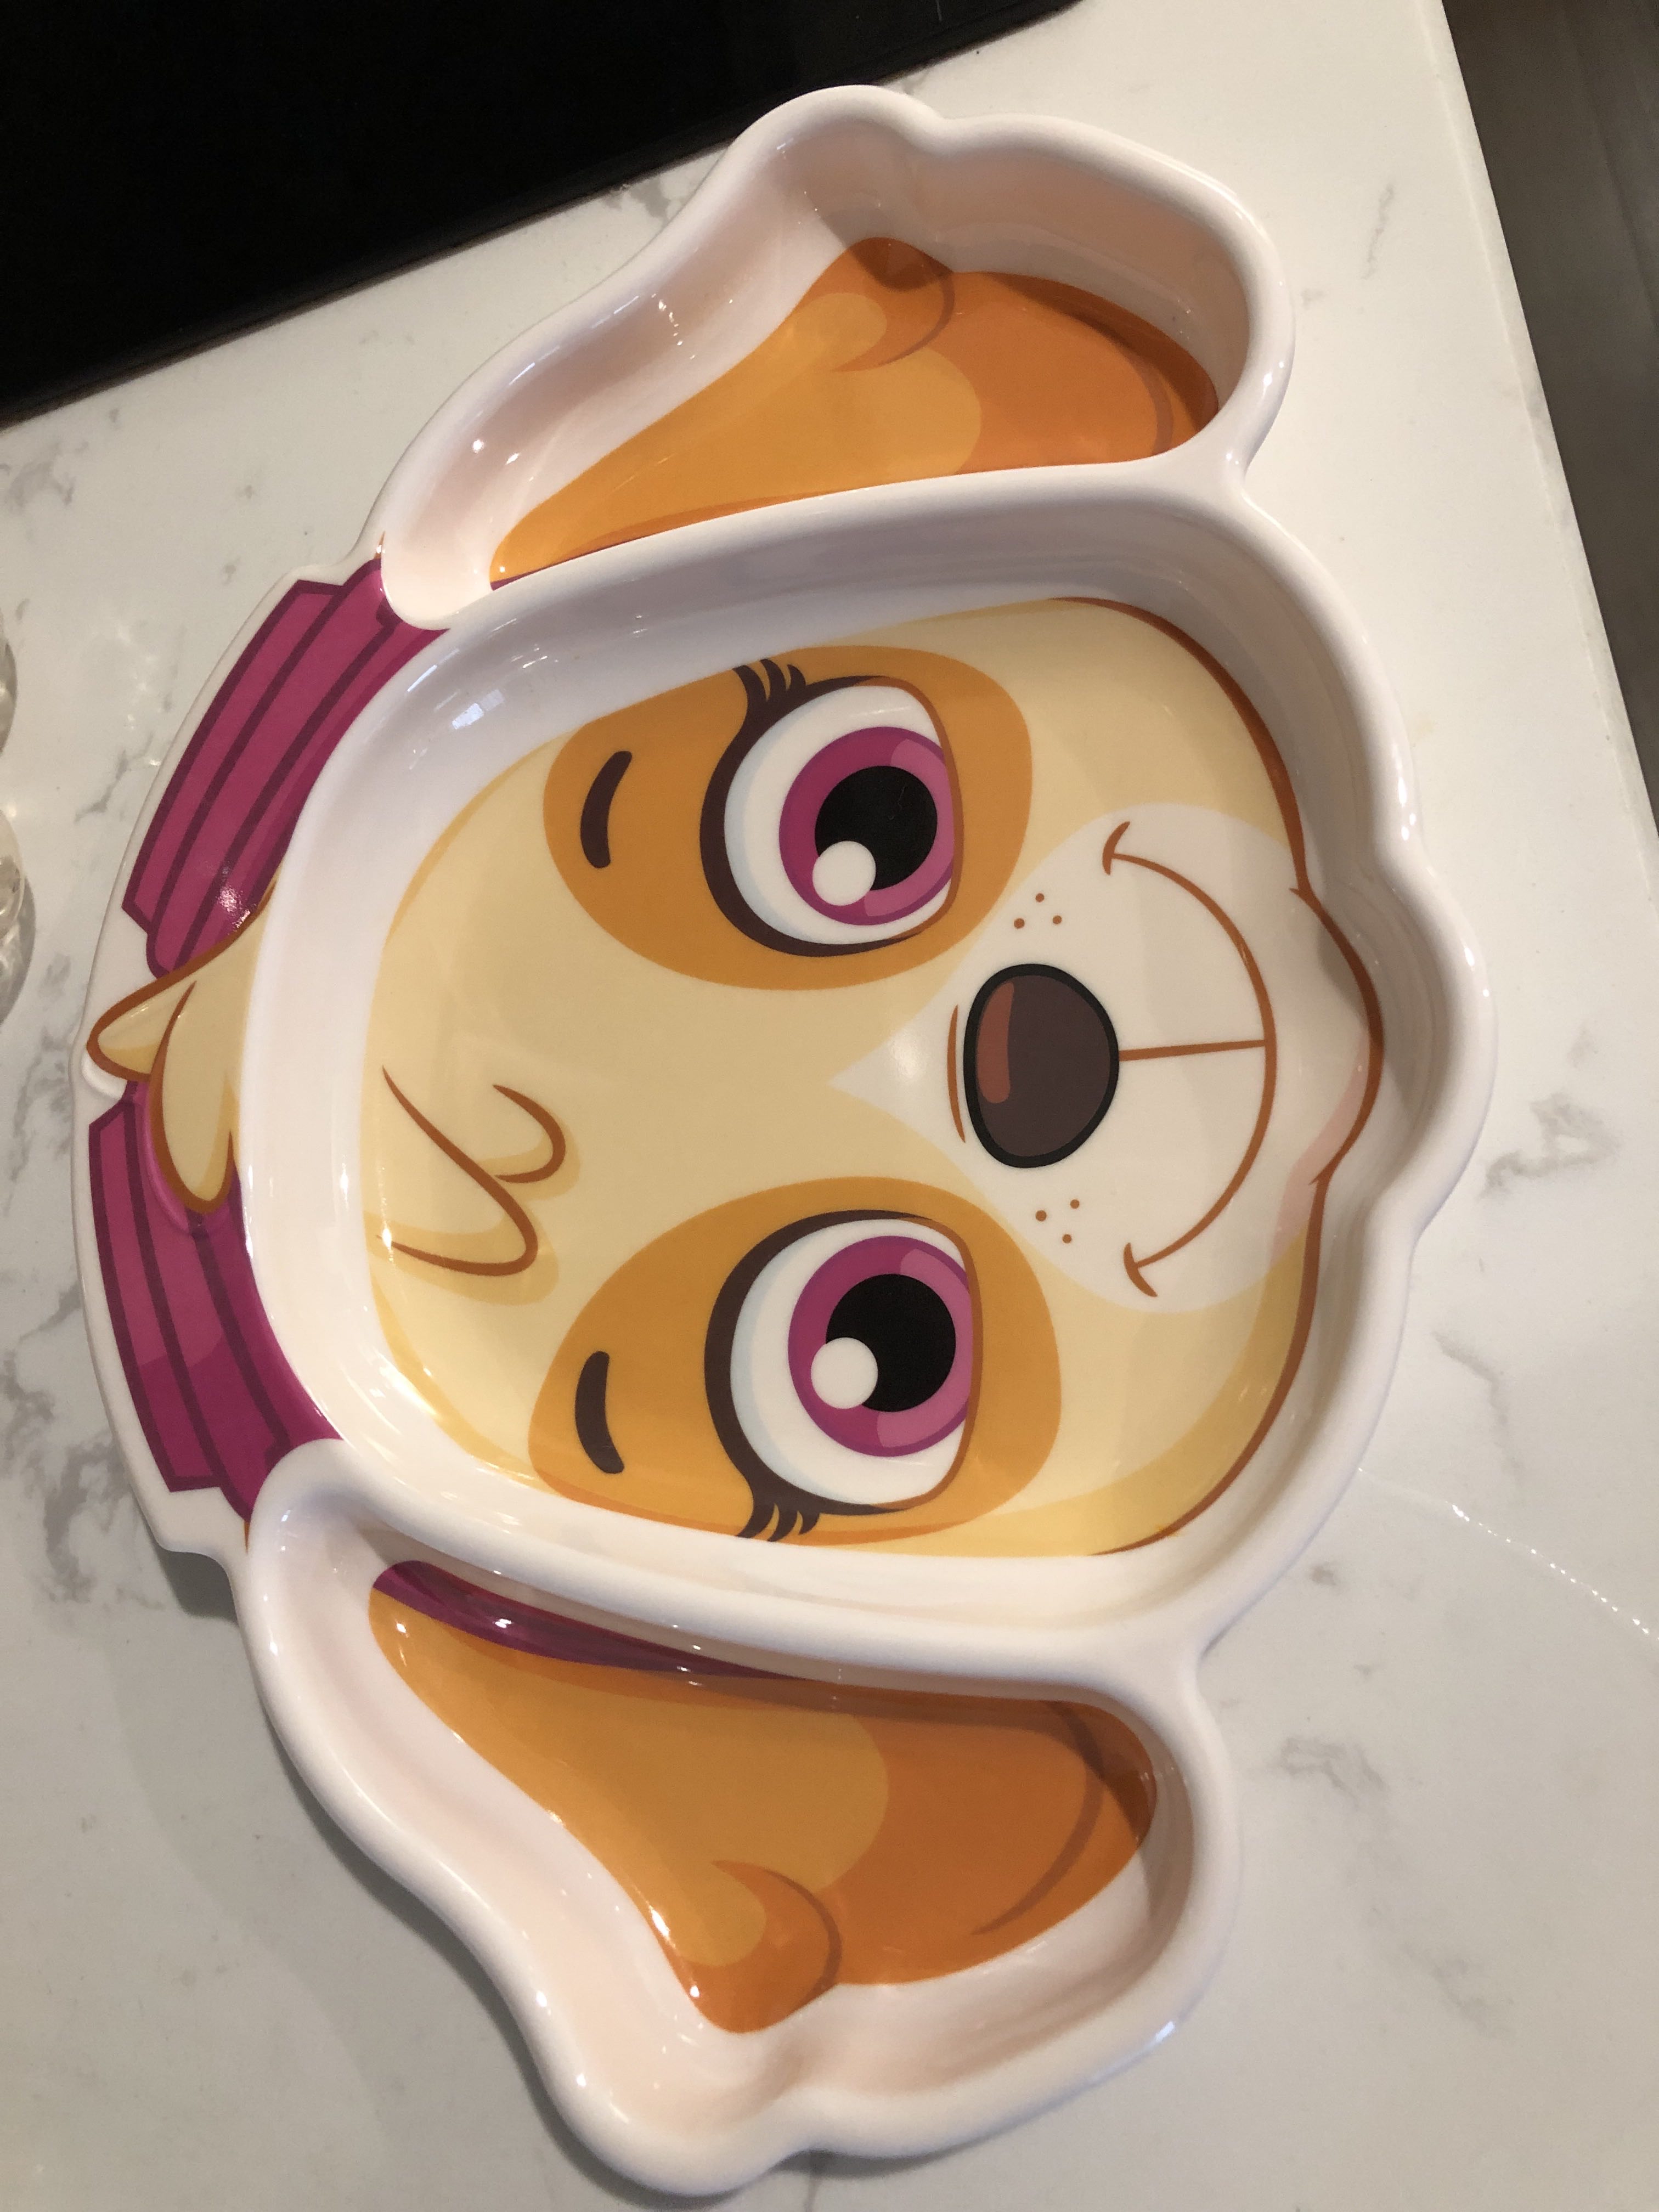 PAW Patrol Dining Set For Kids - 3 PC Themed Dinnerware Set by Dinneractive  - Dog Cartoon - Toddler Plates - Baby Dishes